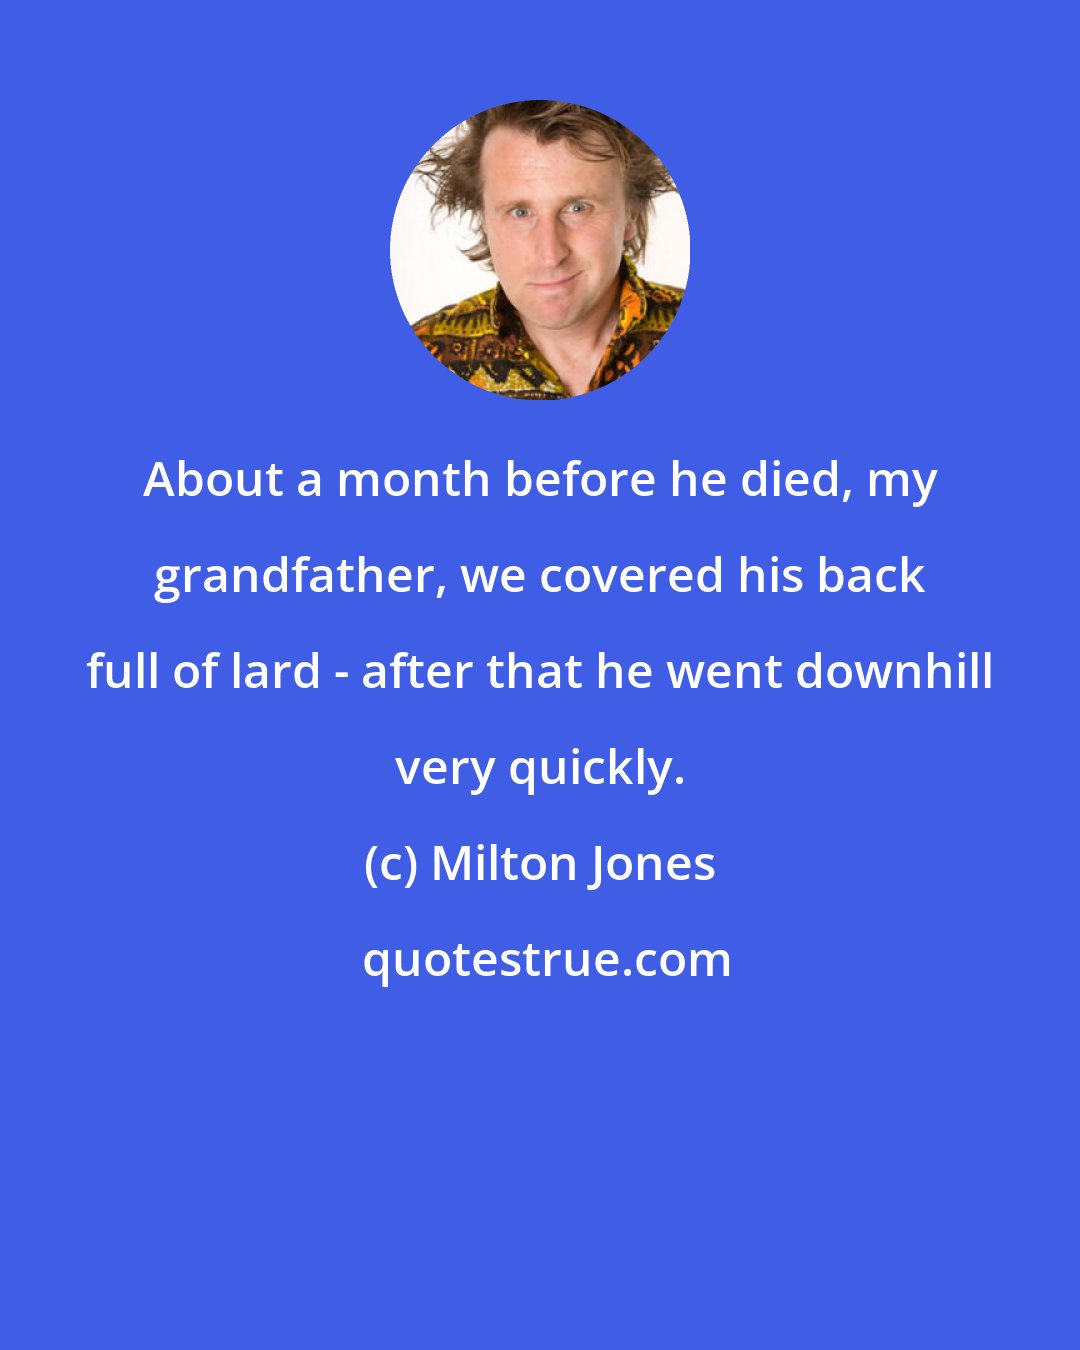 Milton Jones: About a month before he died, my grandfather, we covered his back full of lard - after that he went downhill very quickly.